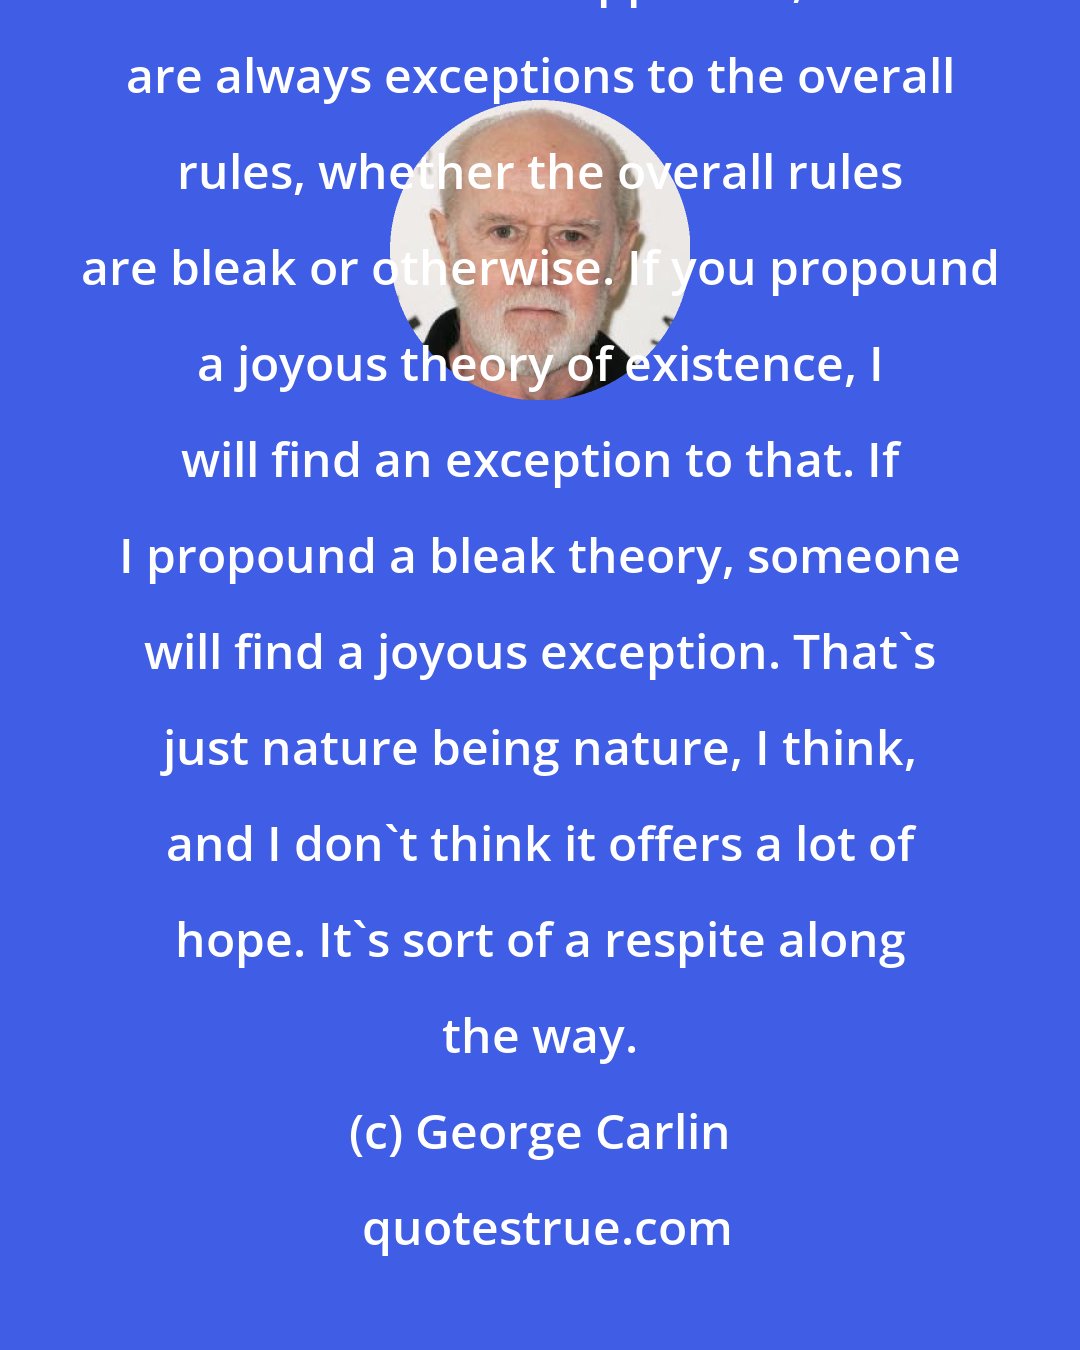 George Carlin: The only good thing about religion is the music. Because nature is filled with balances and opposites, there are always exceptions to the overall rules, whether the overall rules are bleak or otherwise. If you propound a joyous theory of existence, I will find an exception to that. If I propound a bleak theory, someone will find a joyous exception. That's just nature being nature, I think, and I don't think it offers a lot of hope. It's sort of a respite along the way.